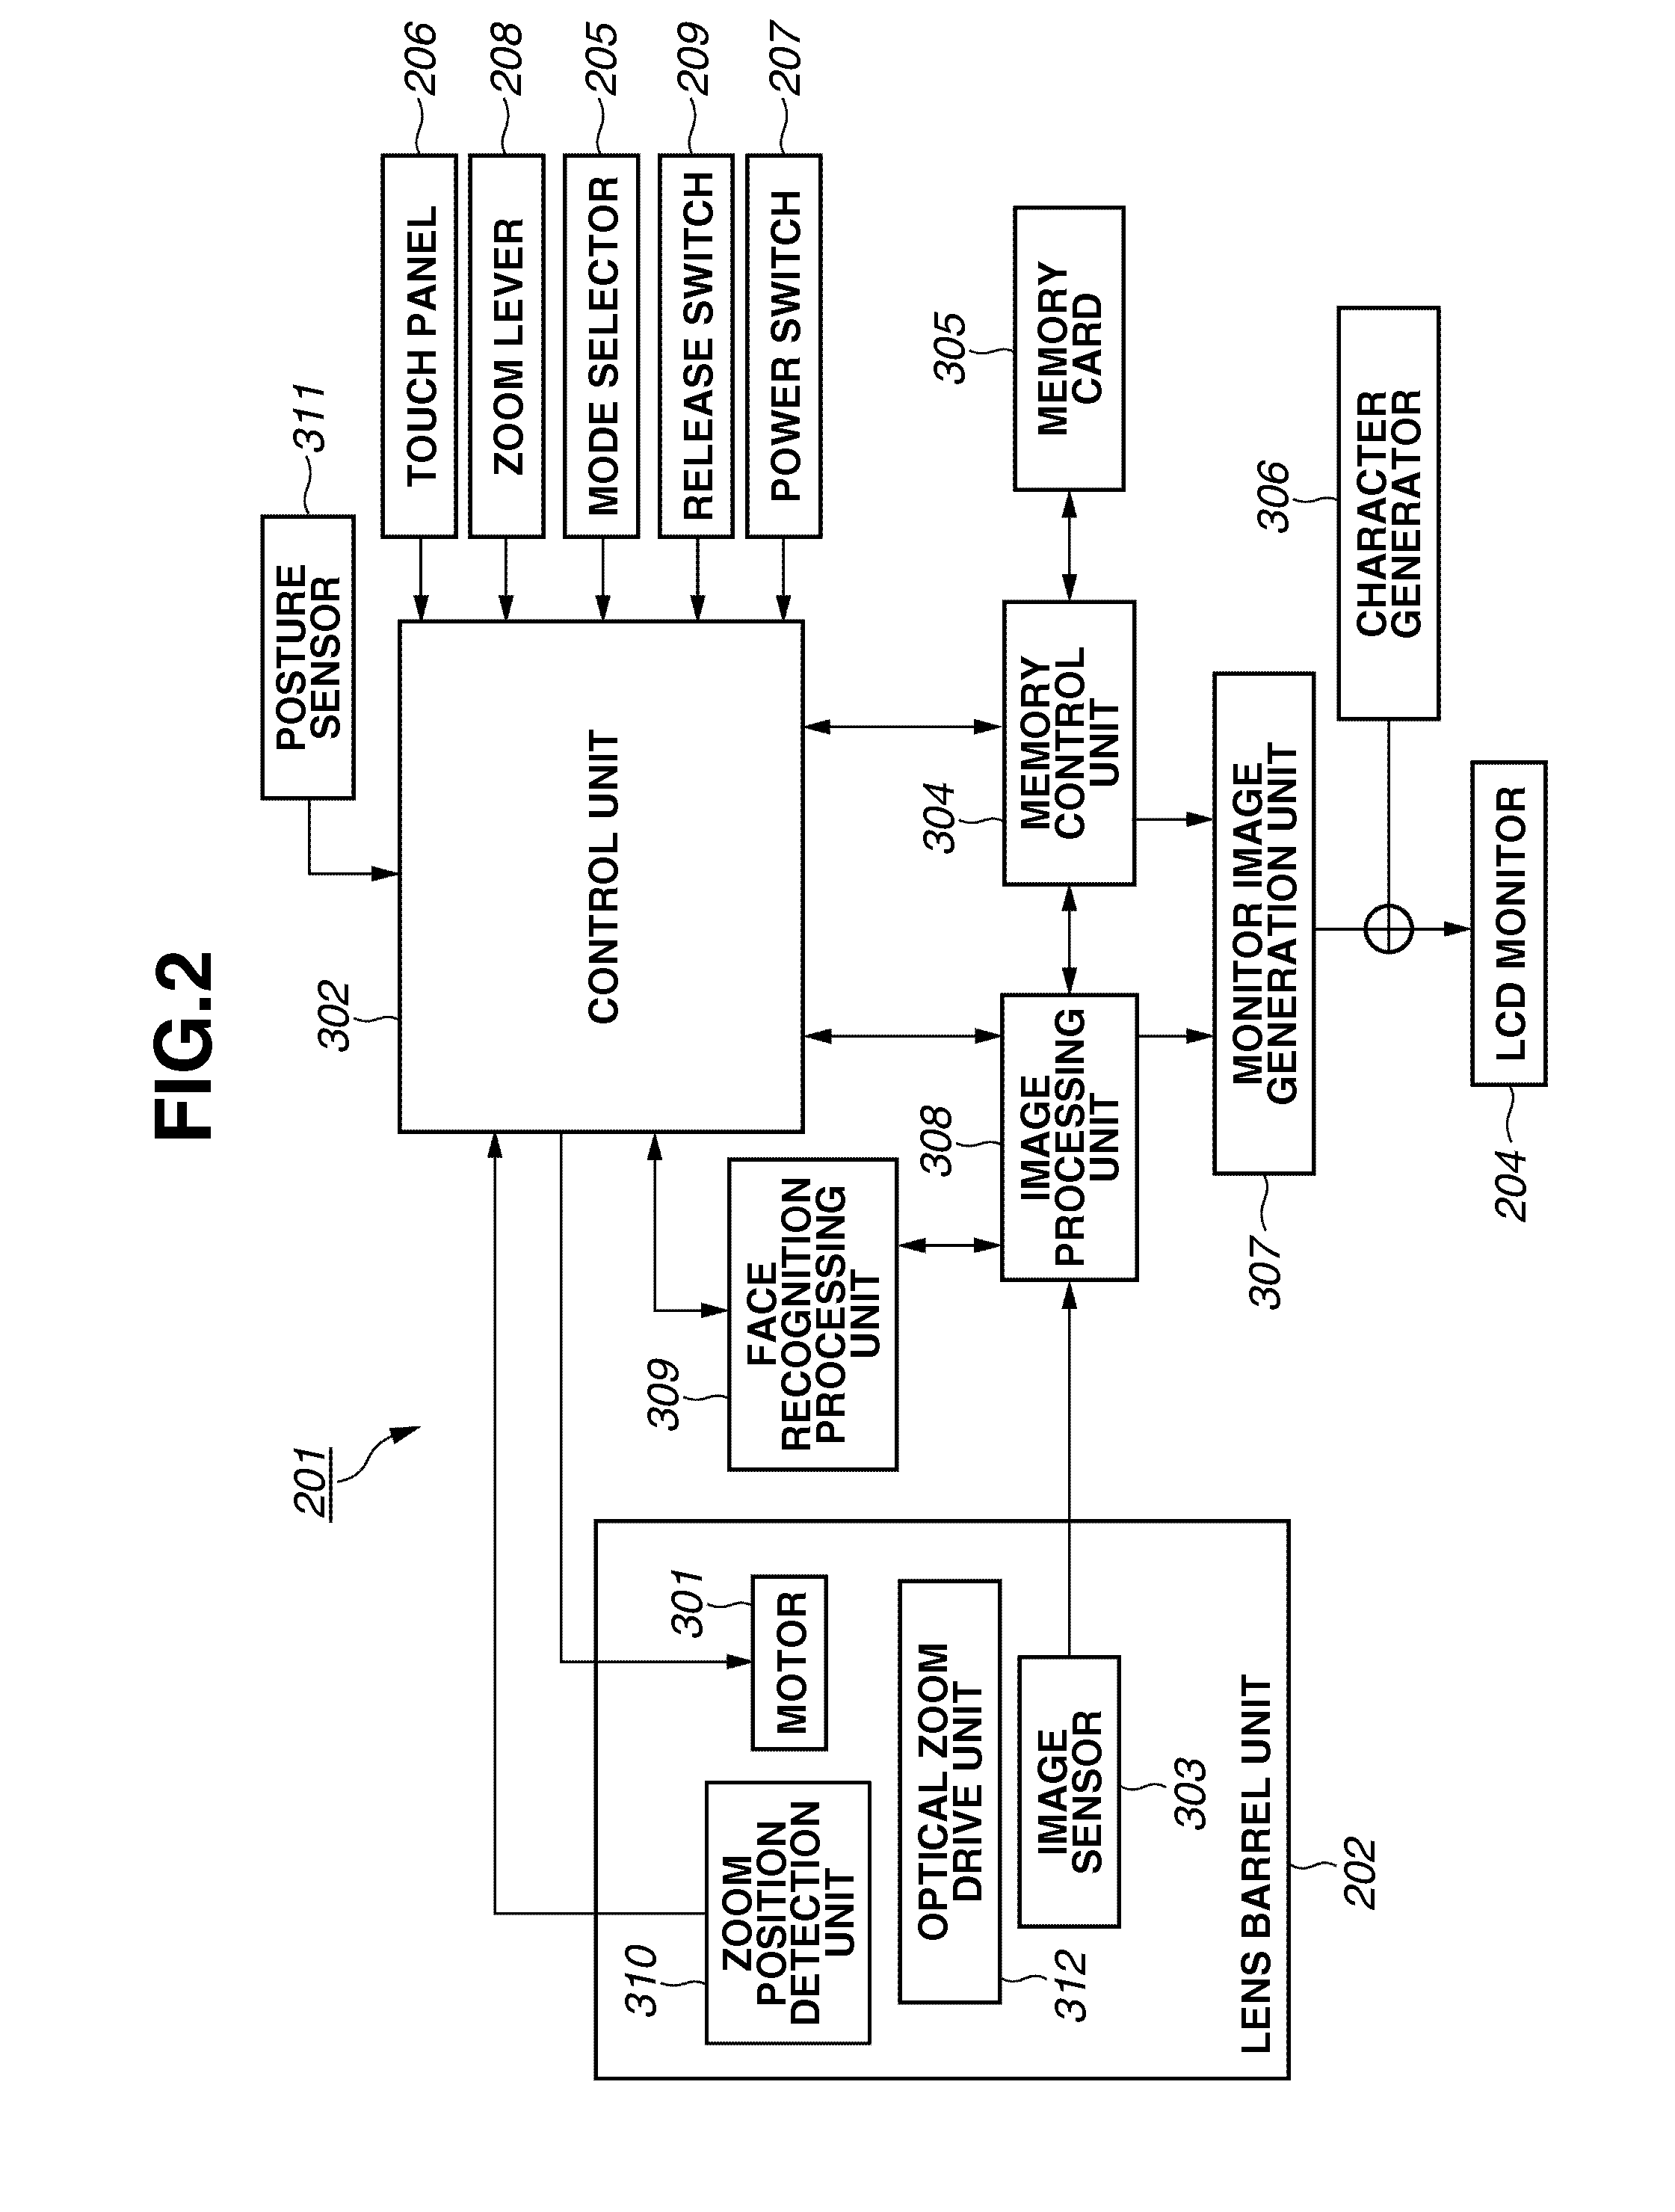 Imaging apparatus for performing automatic zoom control in consideration of face inclination of a subject image